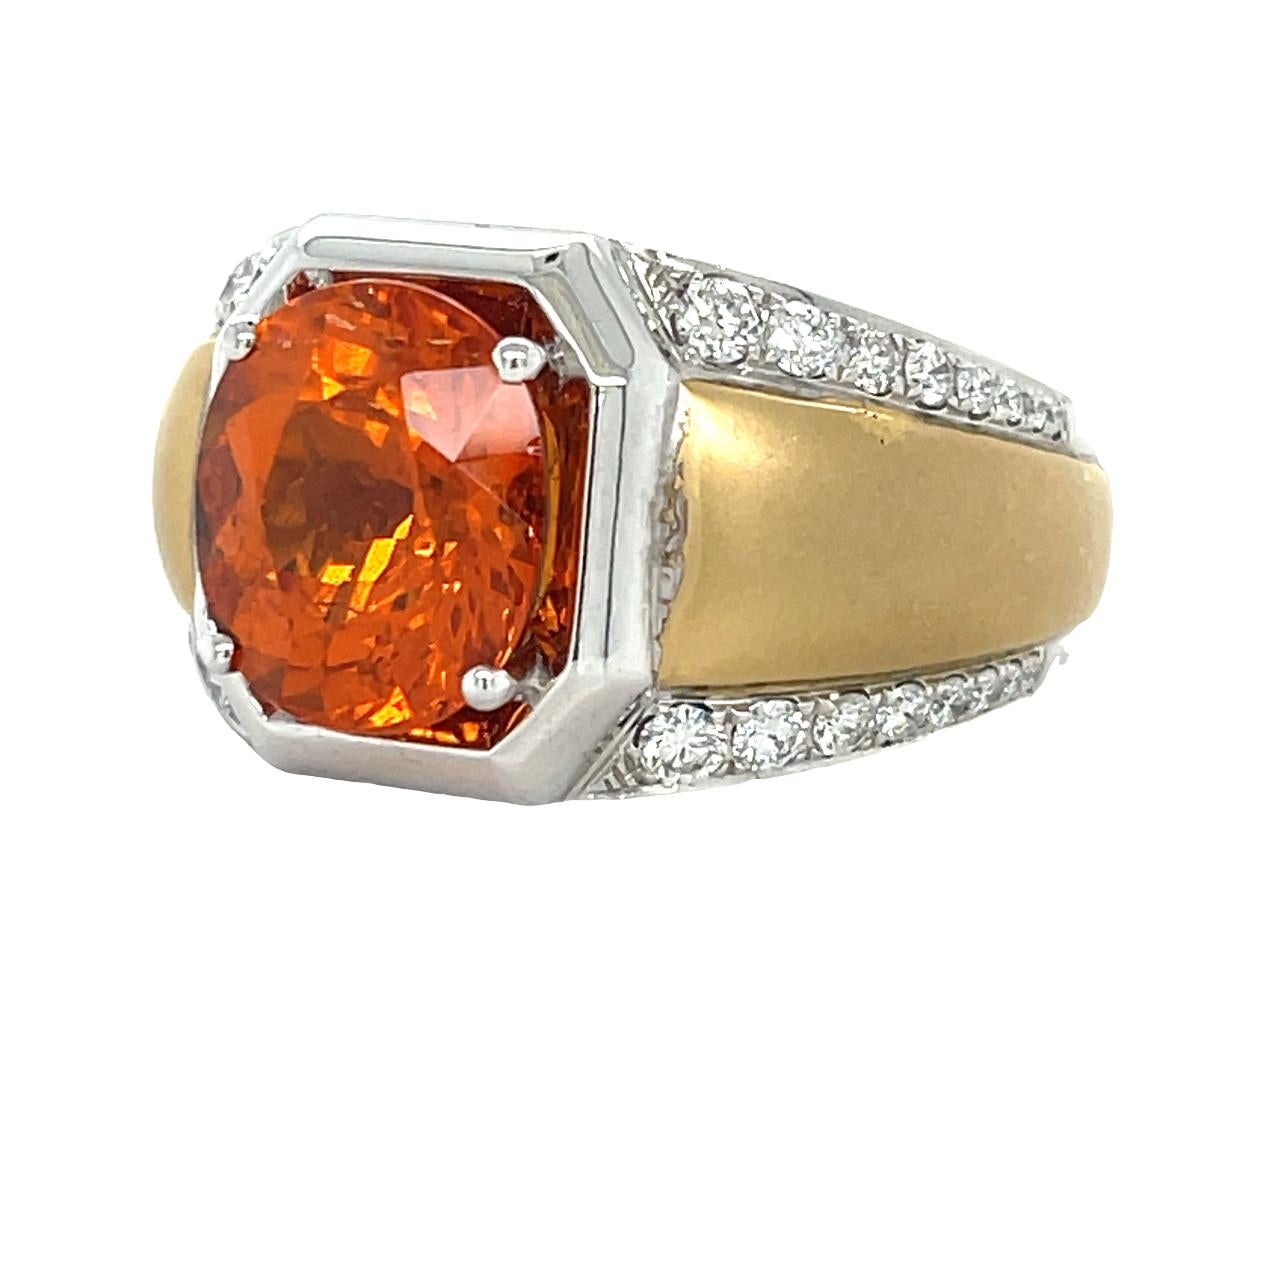 This unique Two Tone Men's ring has a vibrant oragne 12x11 mm Oval cut Spessartite (Orange Garnet) center stone. There are 32 brilliant cut round sparkling diamonds on the shank for the perfect accent. The ring is set in 14K white and yellow gold.